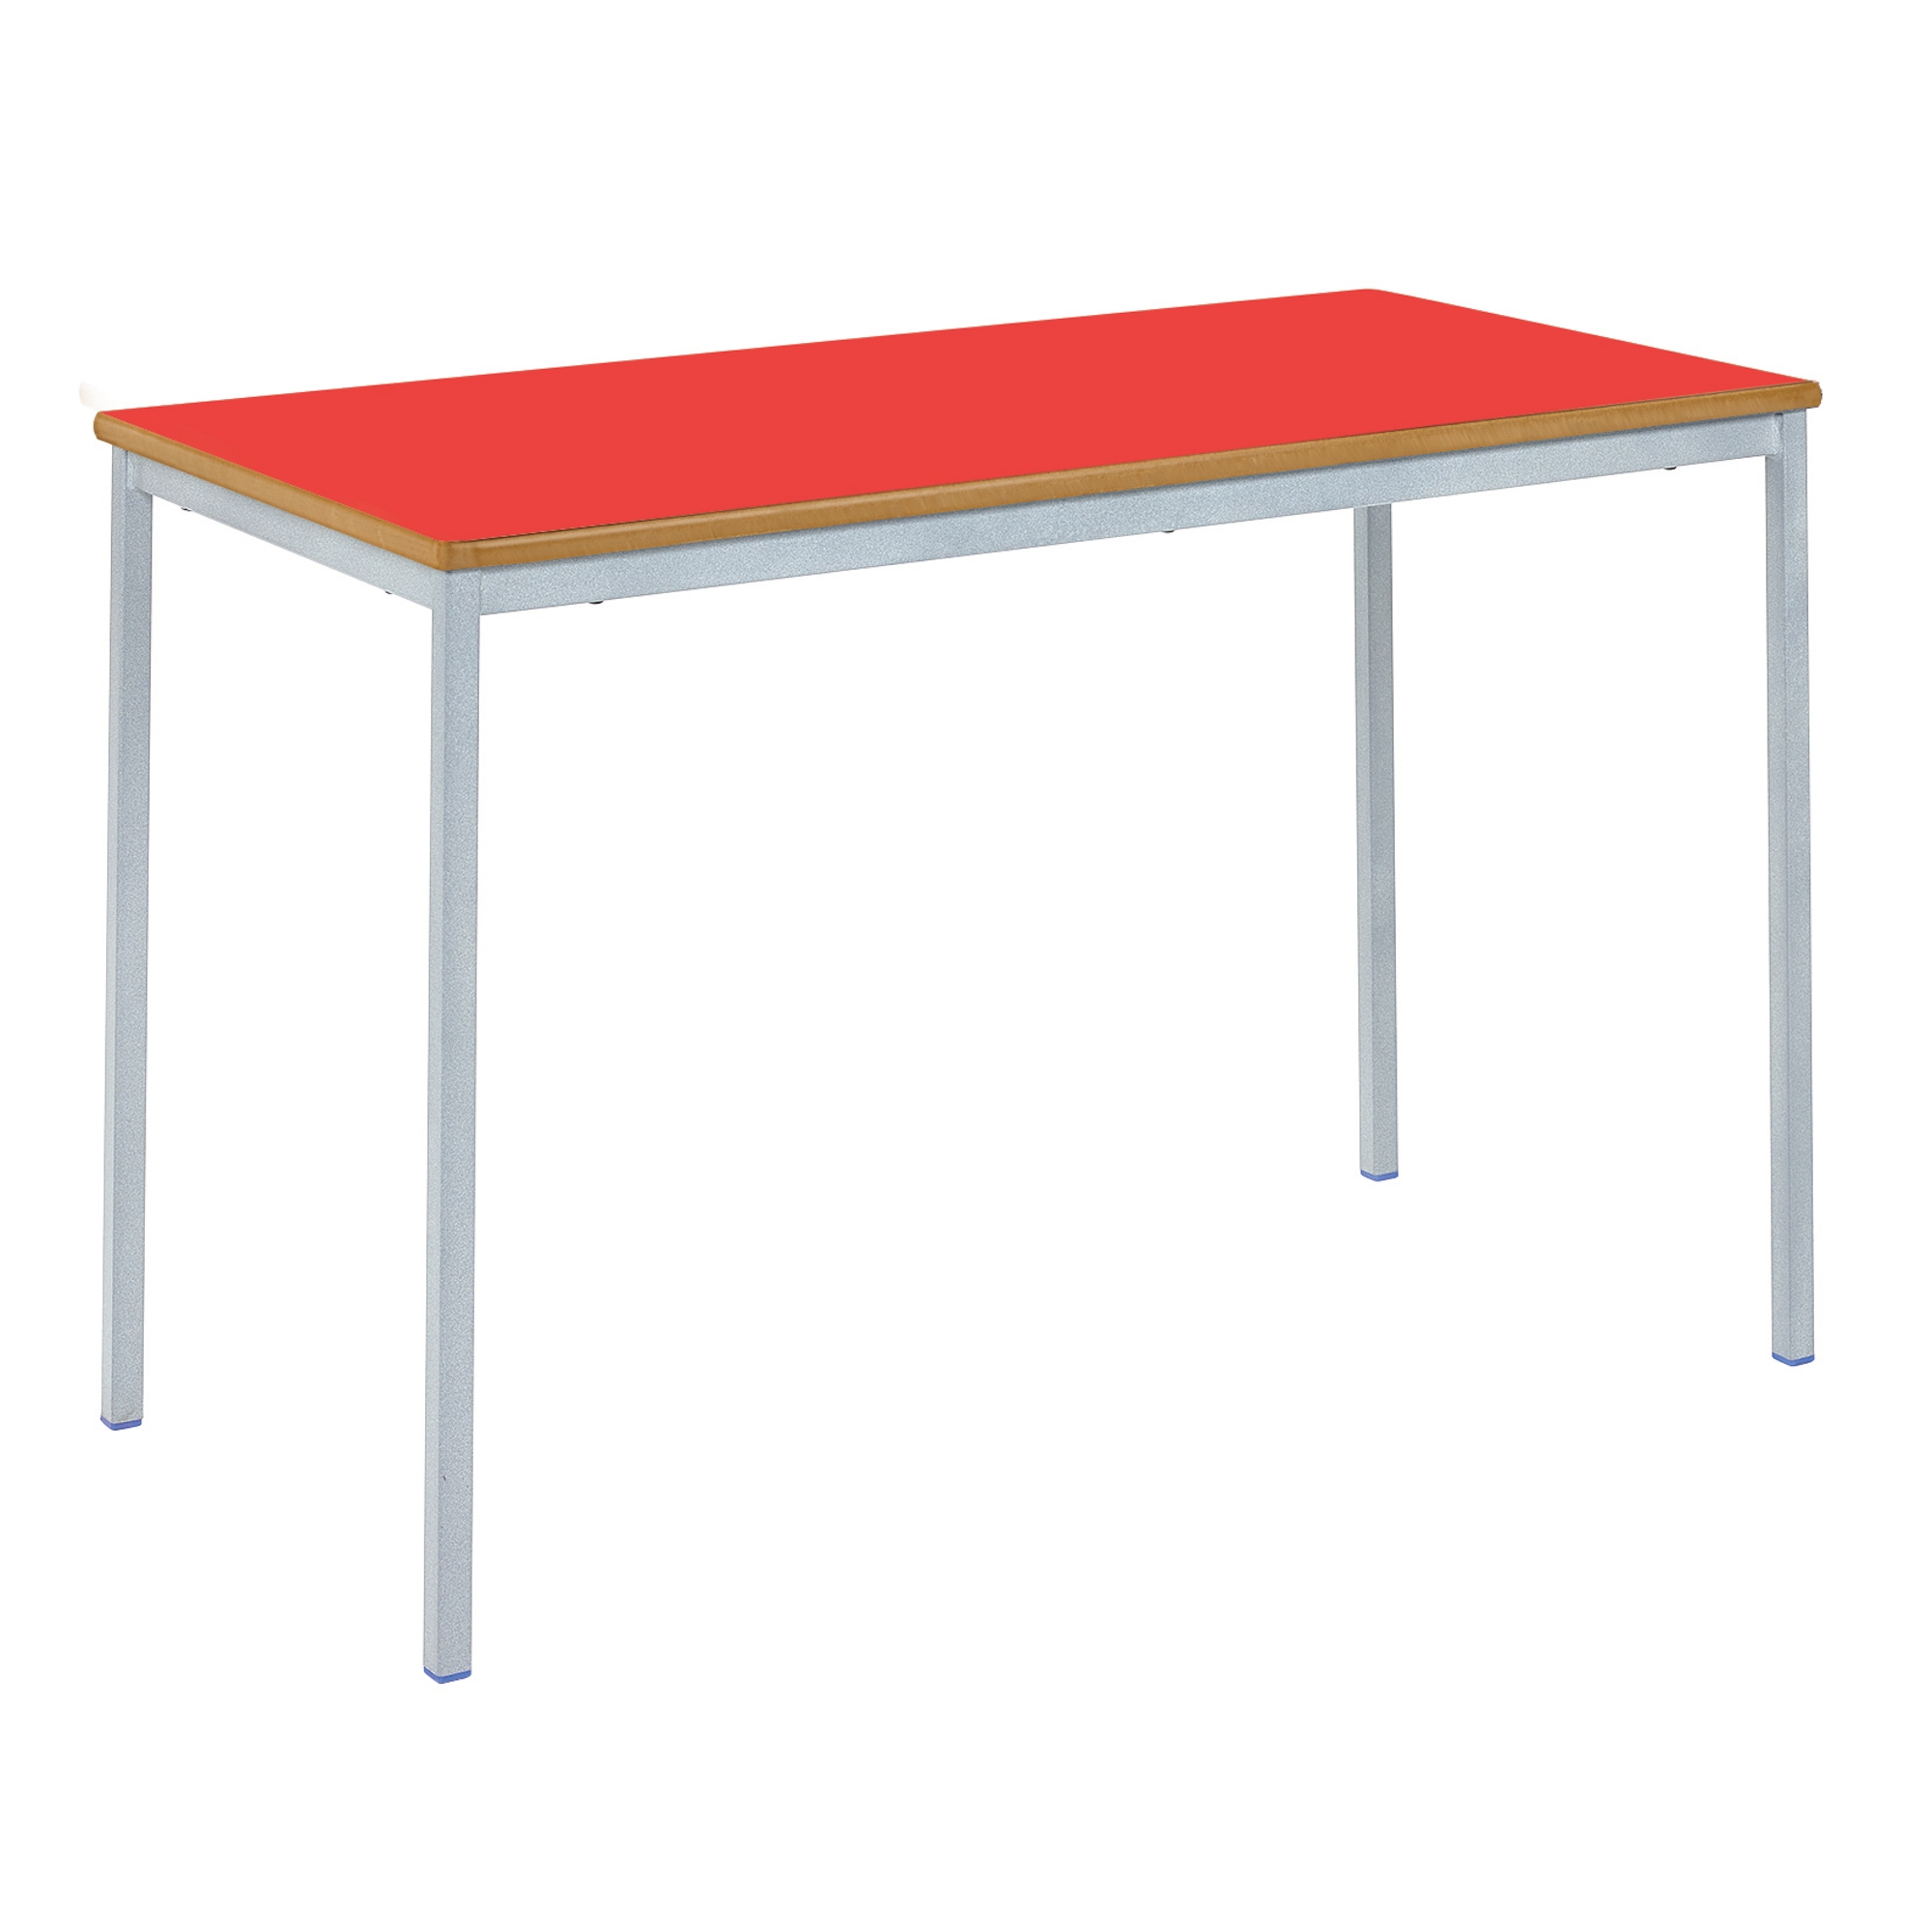 Classmates Rectangular Fully Welded Classroom Table - 1200 x 600 x 640mm - Red